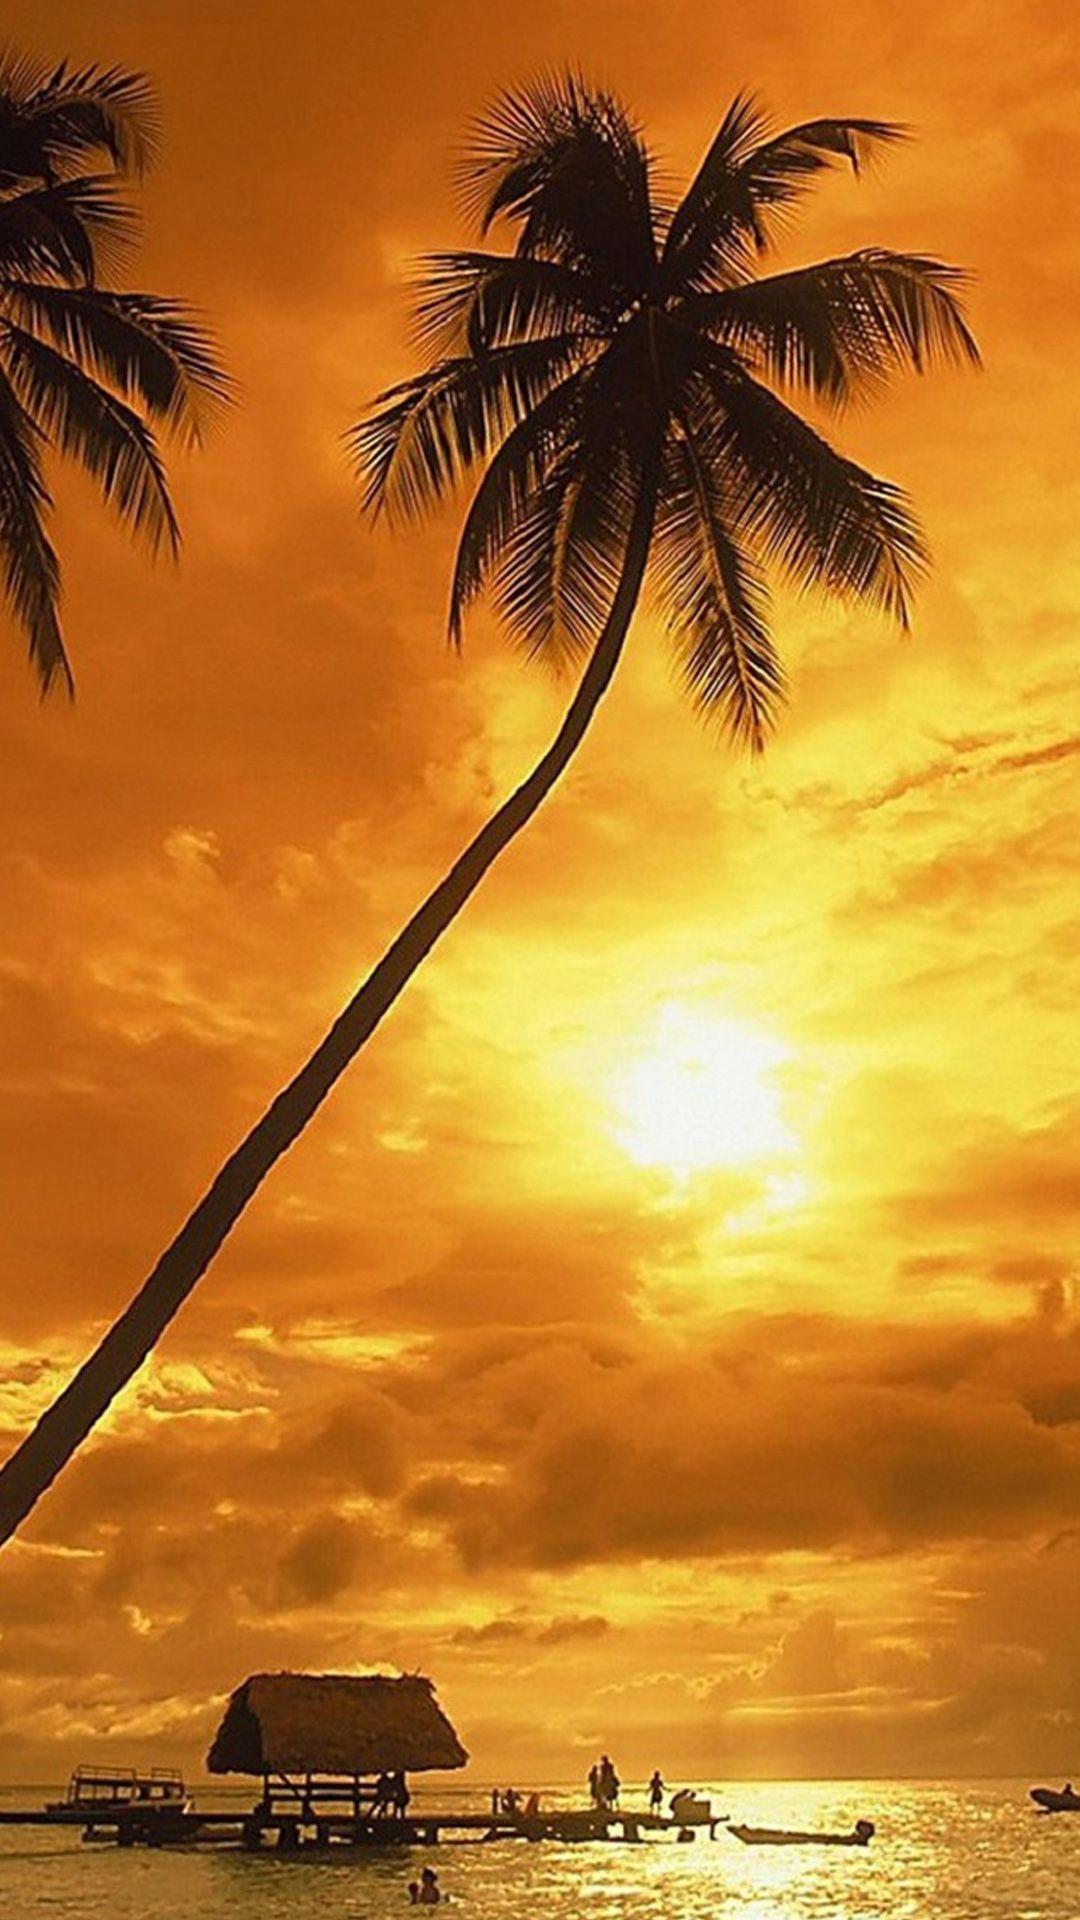 Sunset coconut trees Galaxy S5 Wallpaper